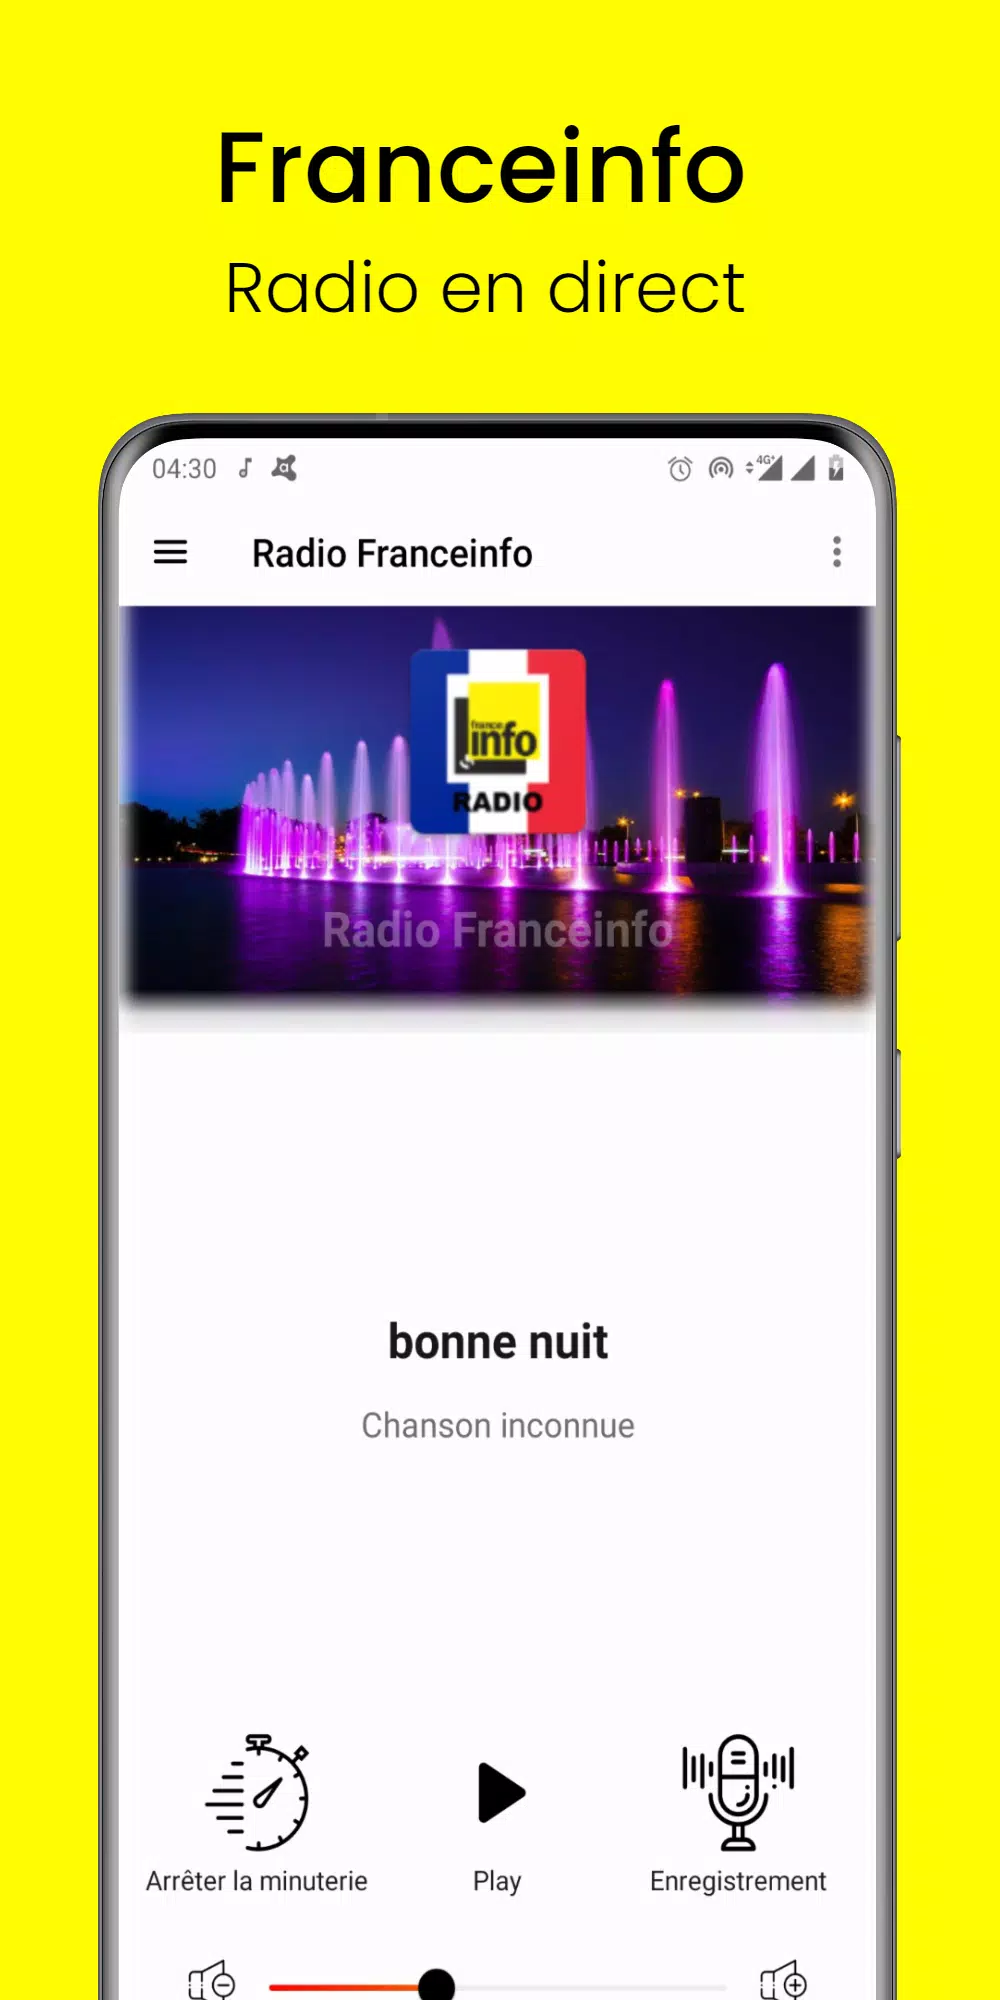 Radio france info online for Android - APK Download